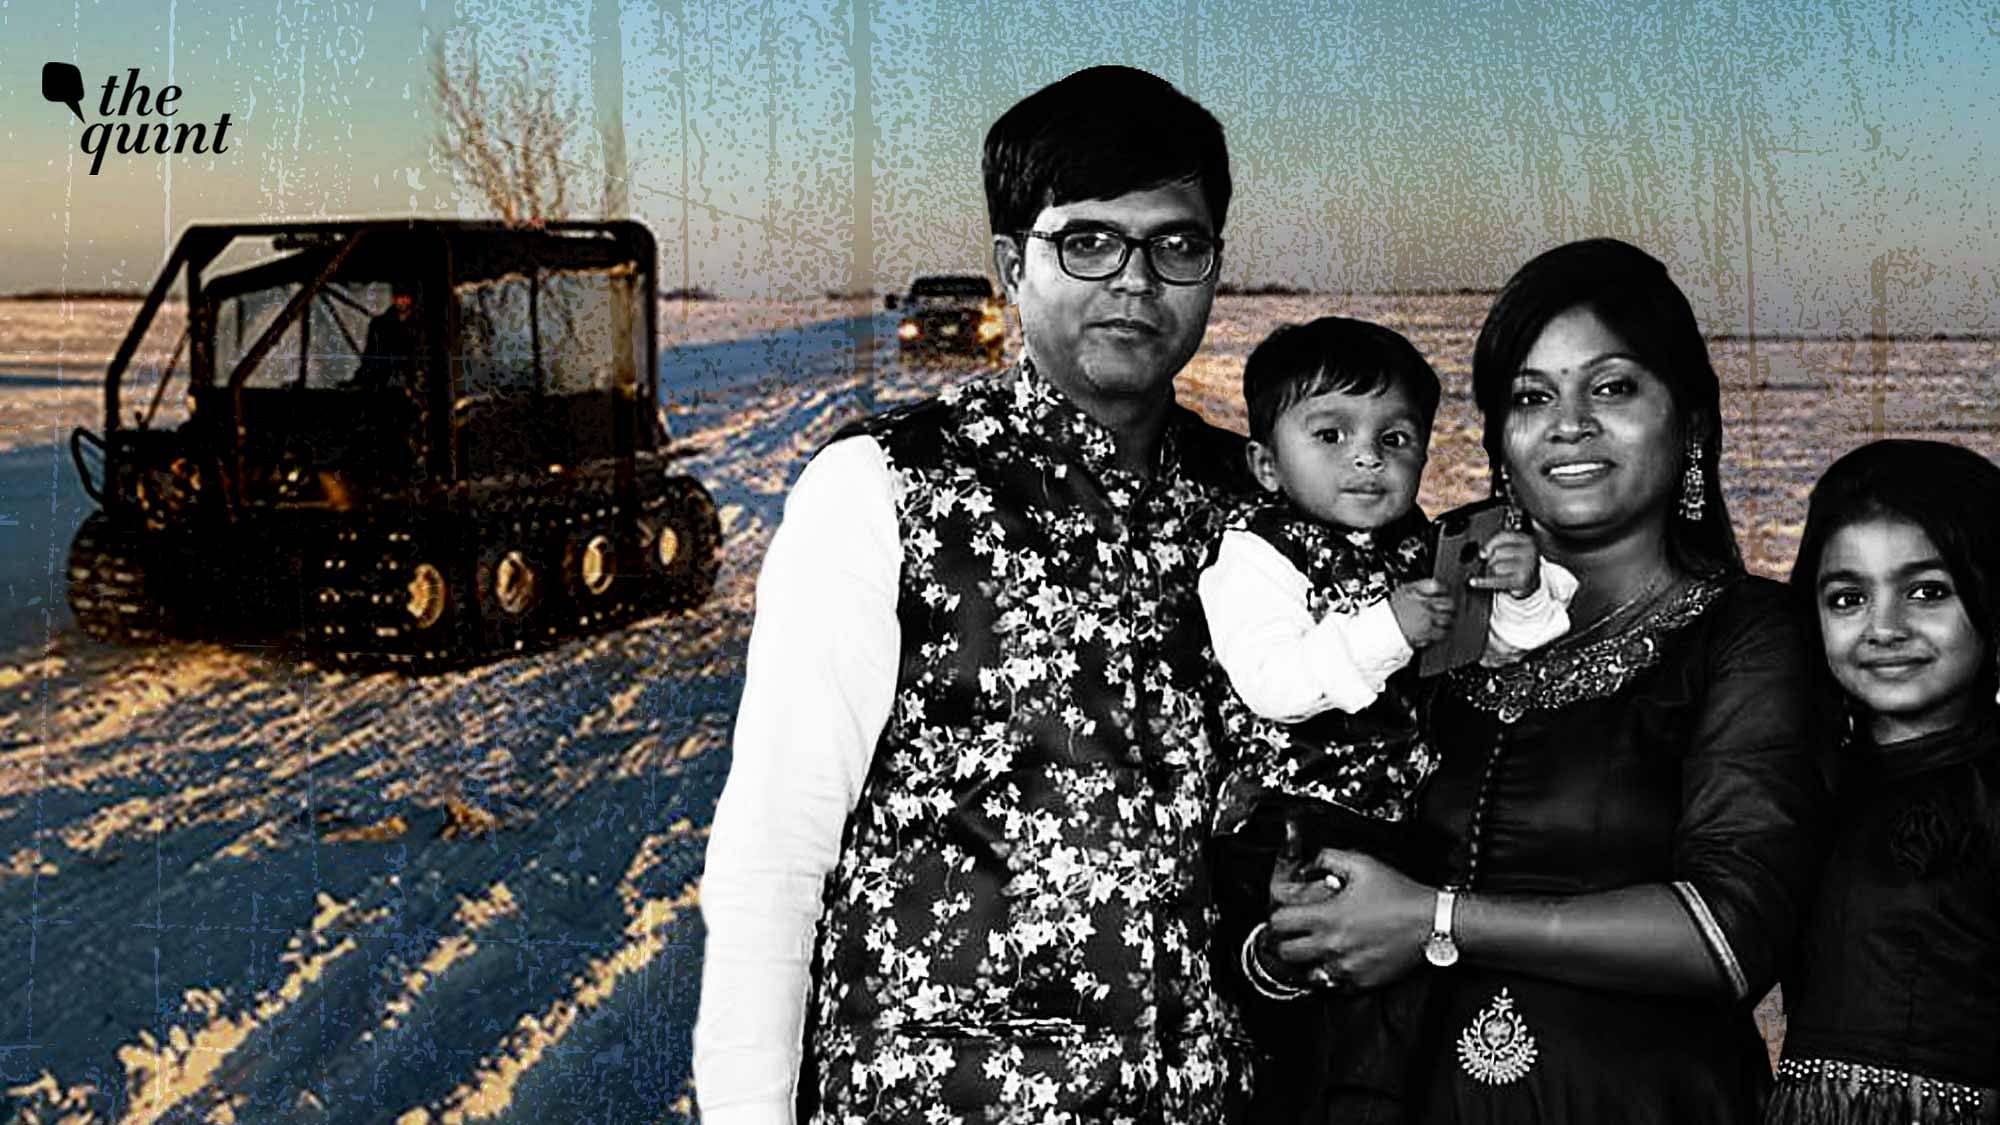 <div class="paragraphs"><p>The family, comprising of 39-year-old Jagdish Patel, his wife Vaishaliben, 37, their 11-year-old daughter Vihangi and three-year-old son Dharmik, were found frozen near the US-Canada border in January last year.&nbsp;</p></div>